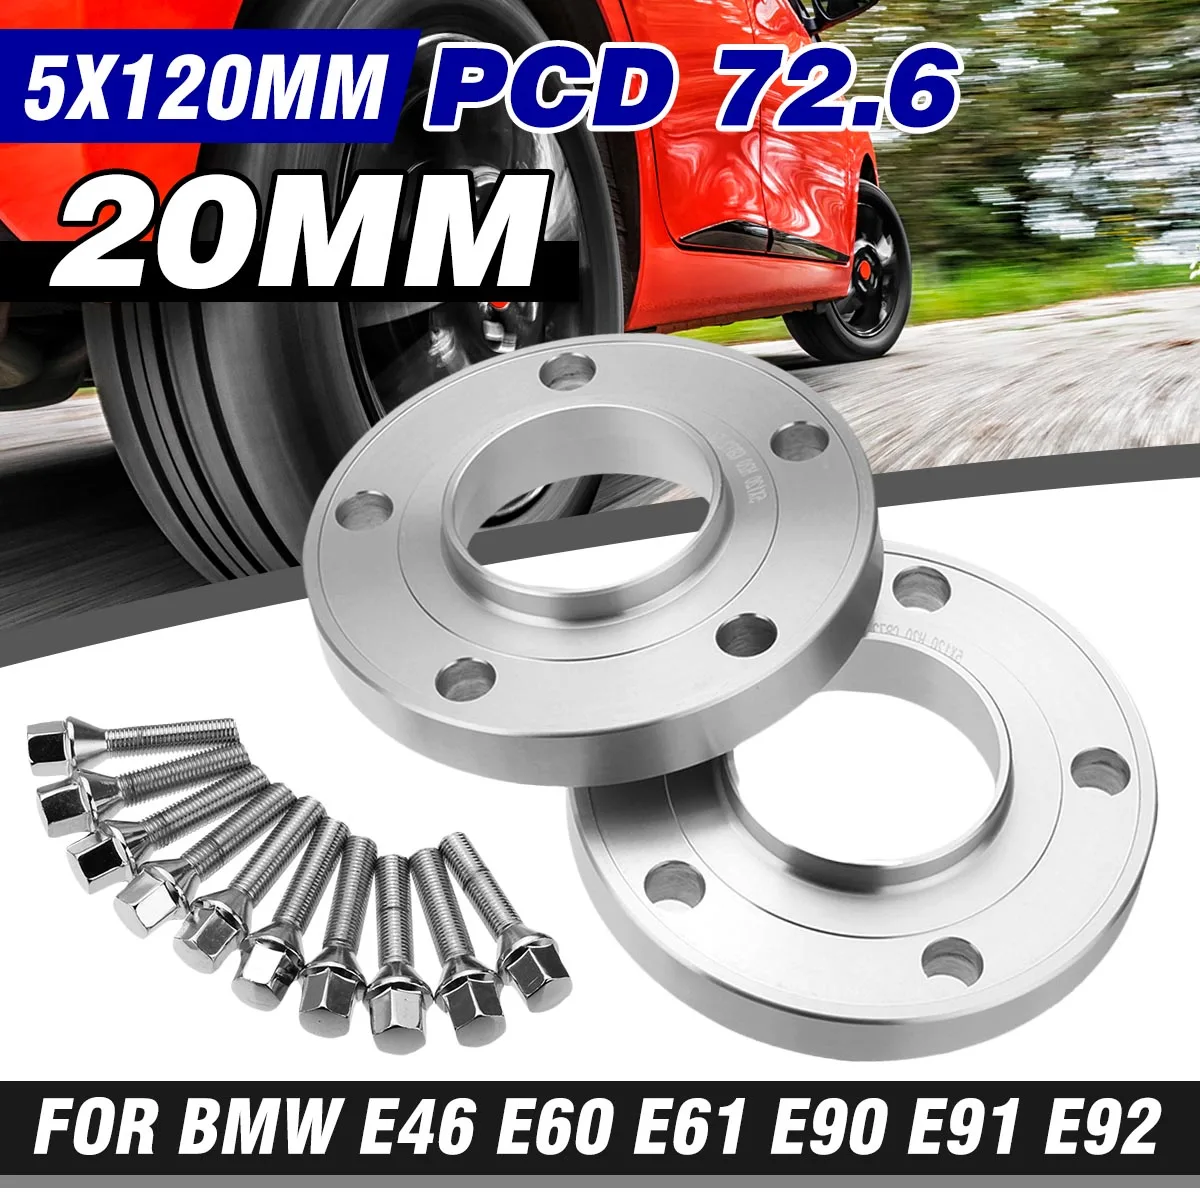 ECCPP Replacement for 5 Lug Hub Centric Wheel Spacers 20mm Thick 5x120mm to 5x120mm 4X for BMW E46 E90 E91 E92 E93 E60 E61 E82 E88 E30 E36 E28 E34 E24 E63 E64 E23 E32 E38 E52 